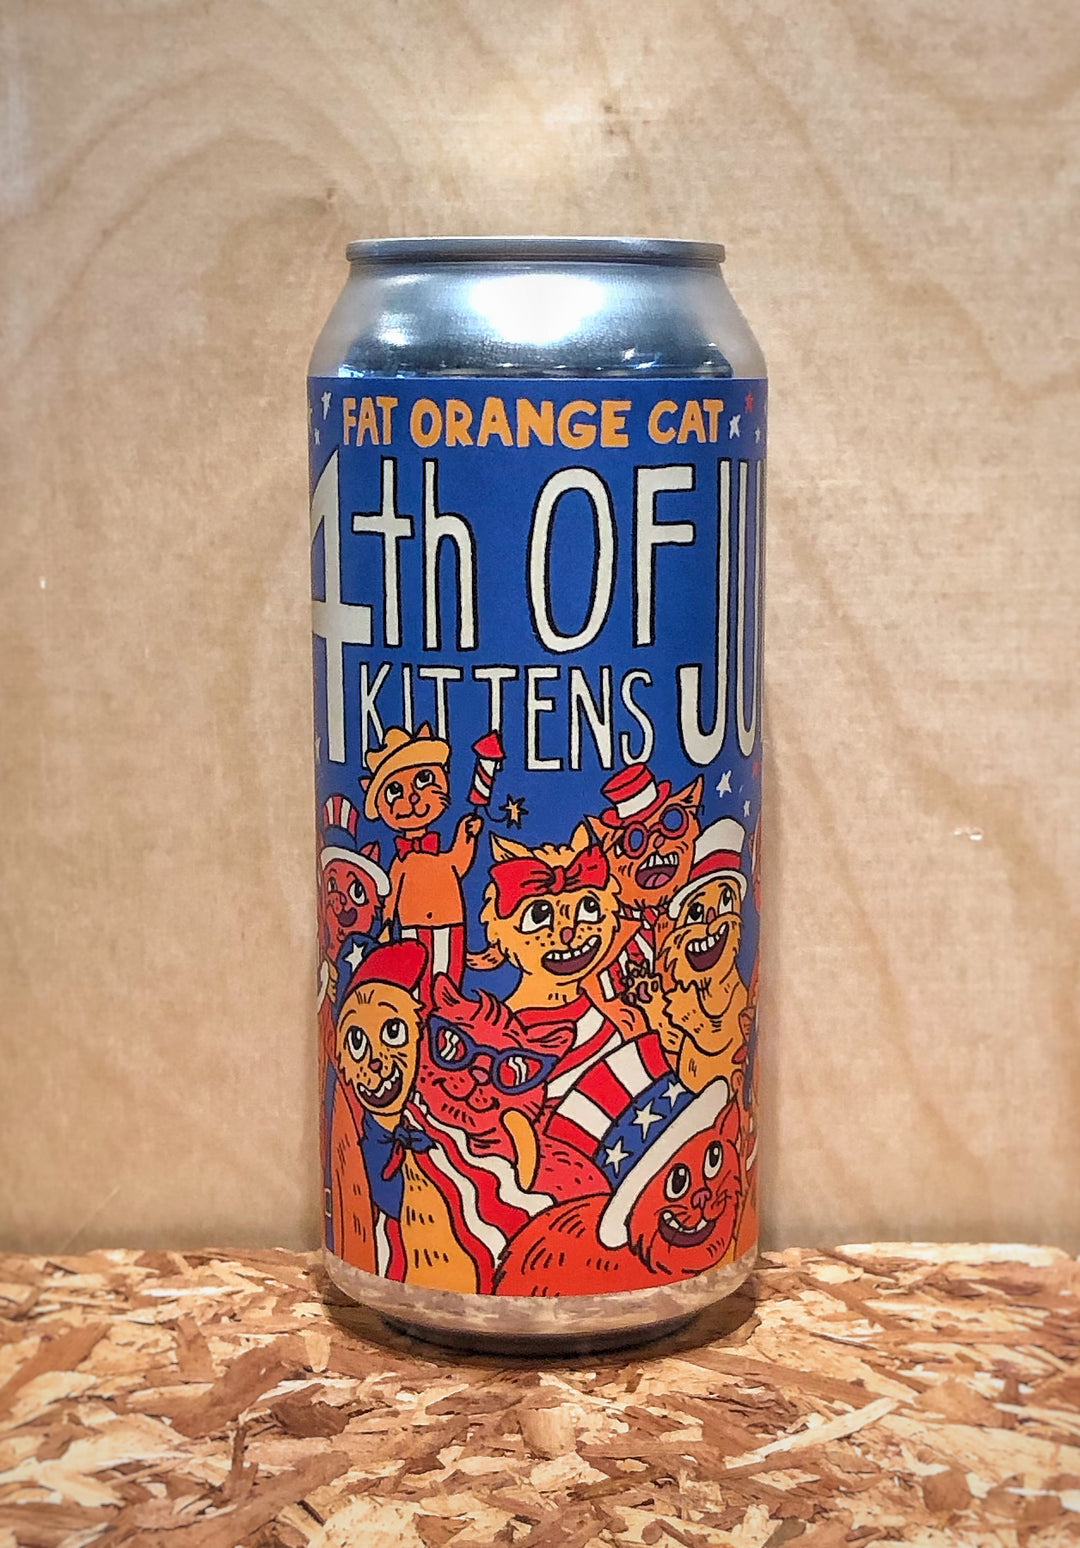 Fat Orange Cat '4th of July Kittens' American IPA Hazy India Pale Ale (North Haven, CT)